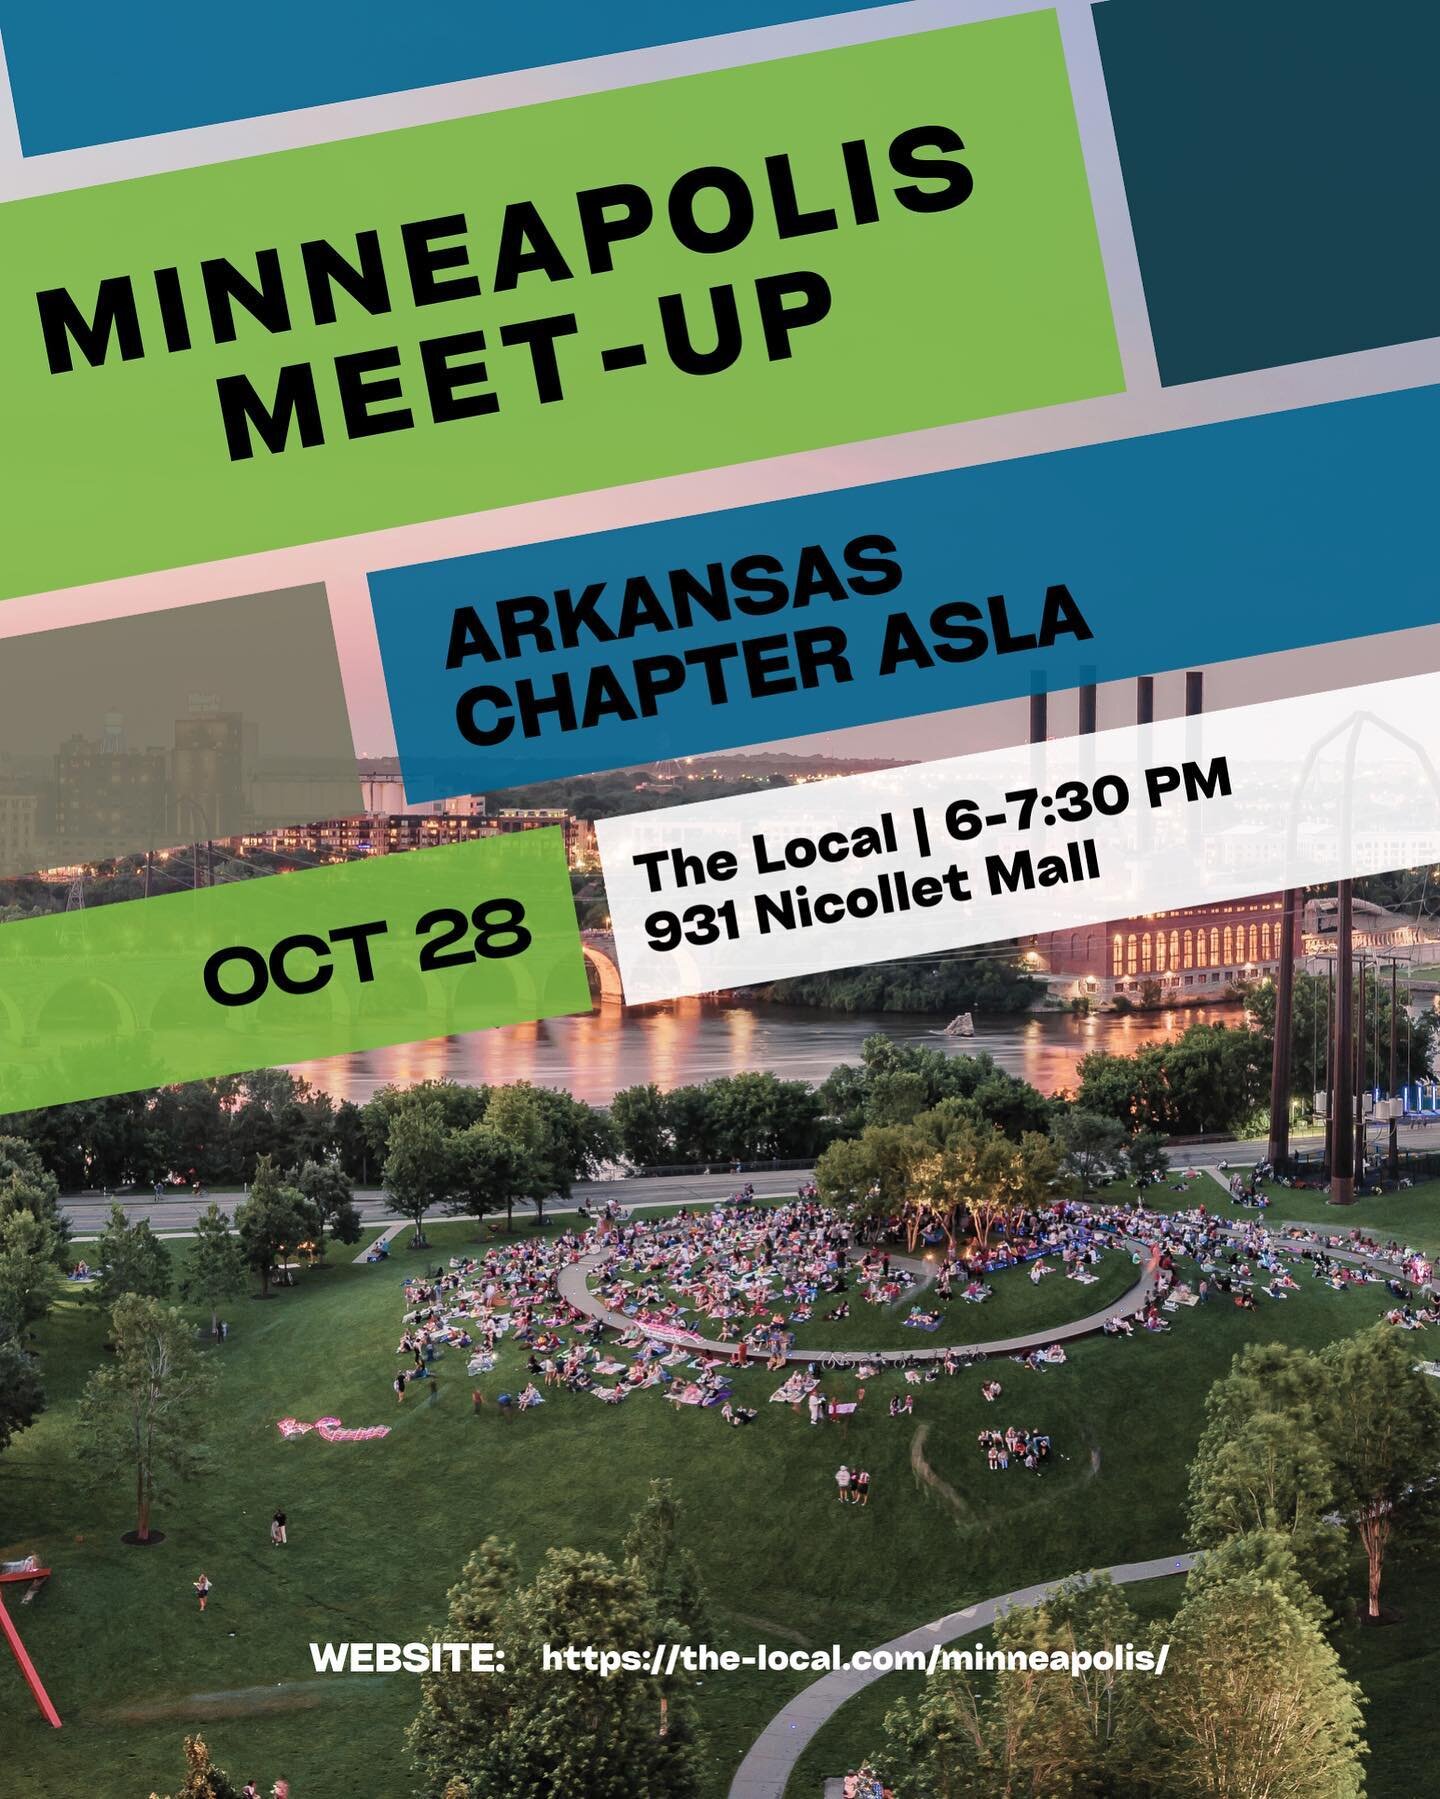 If you are attending the ASLA conference, please join us for a meet-up at The Local!